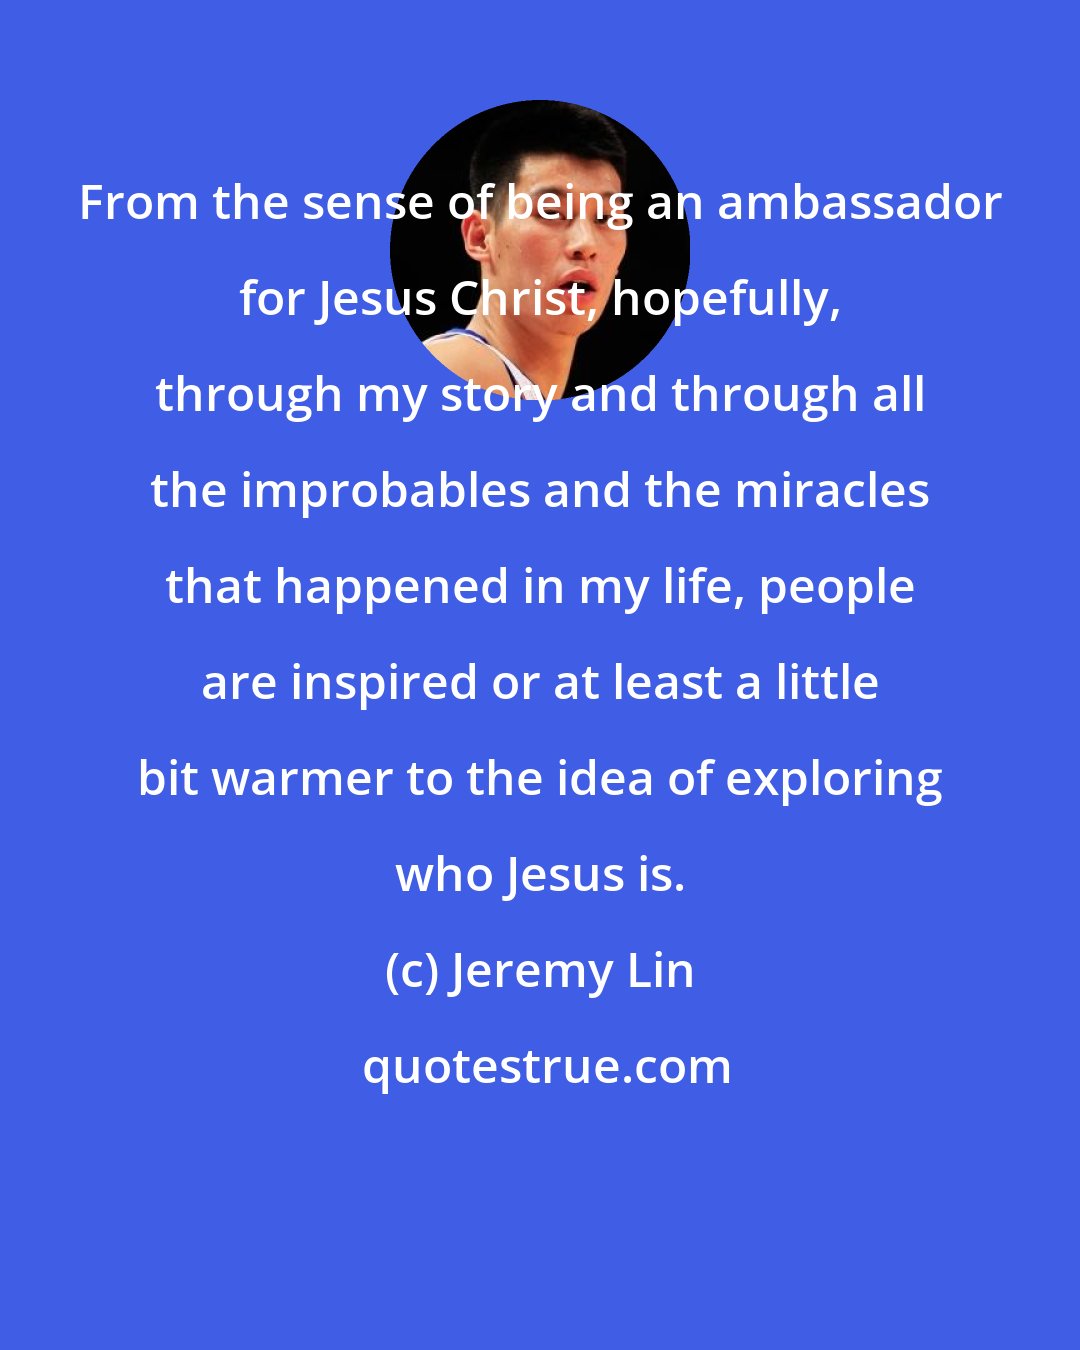 Jeremy Lin: From the sense of being an ambassador for Jesus Christ, hopefully, through my story and through all the improbables and the miracles that happened in my life, people are inspired or at least a little bit warmer to the idea of exploring who Jesus is.